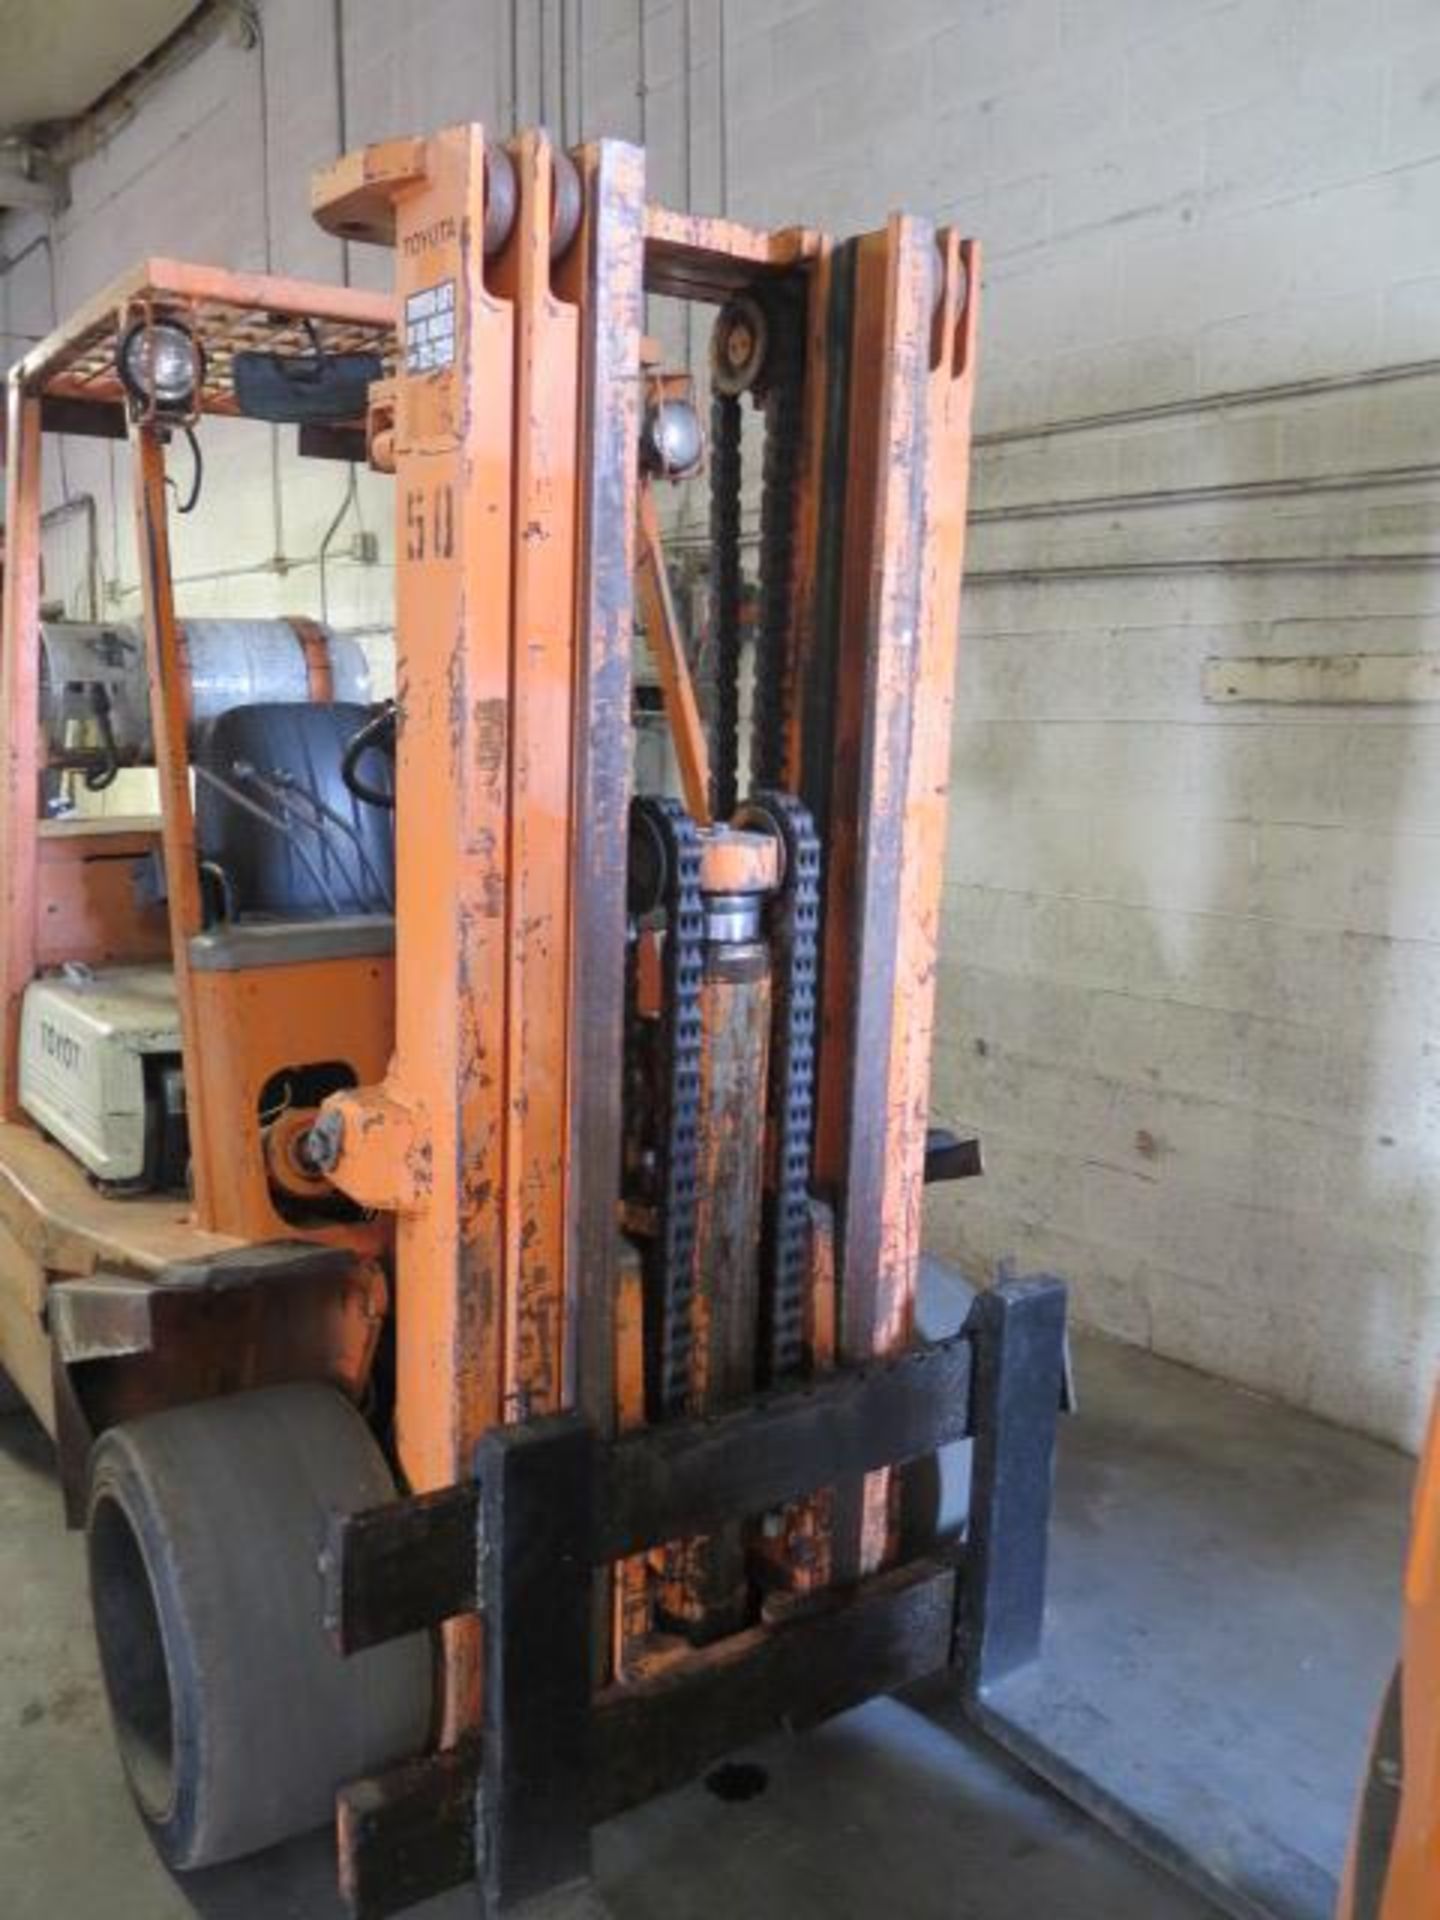 Toyota FGC45 10,000 Lb Cap LPG Forklift s/n FGC45-11615 w/ 3-Stage Mast, 157" Lift Height, Side - Image 5 of 10